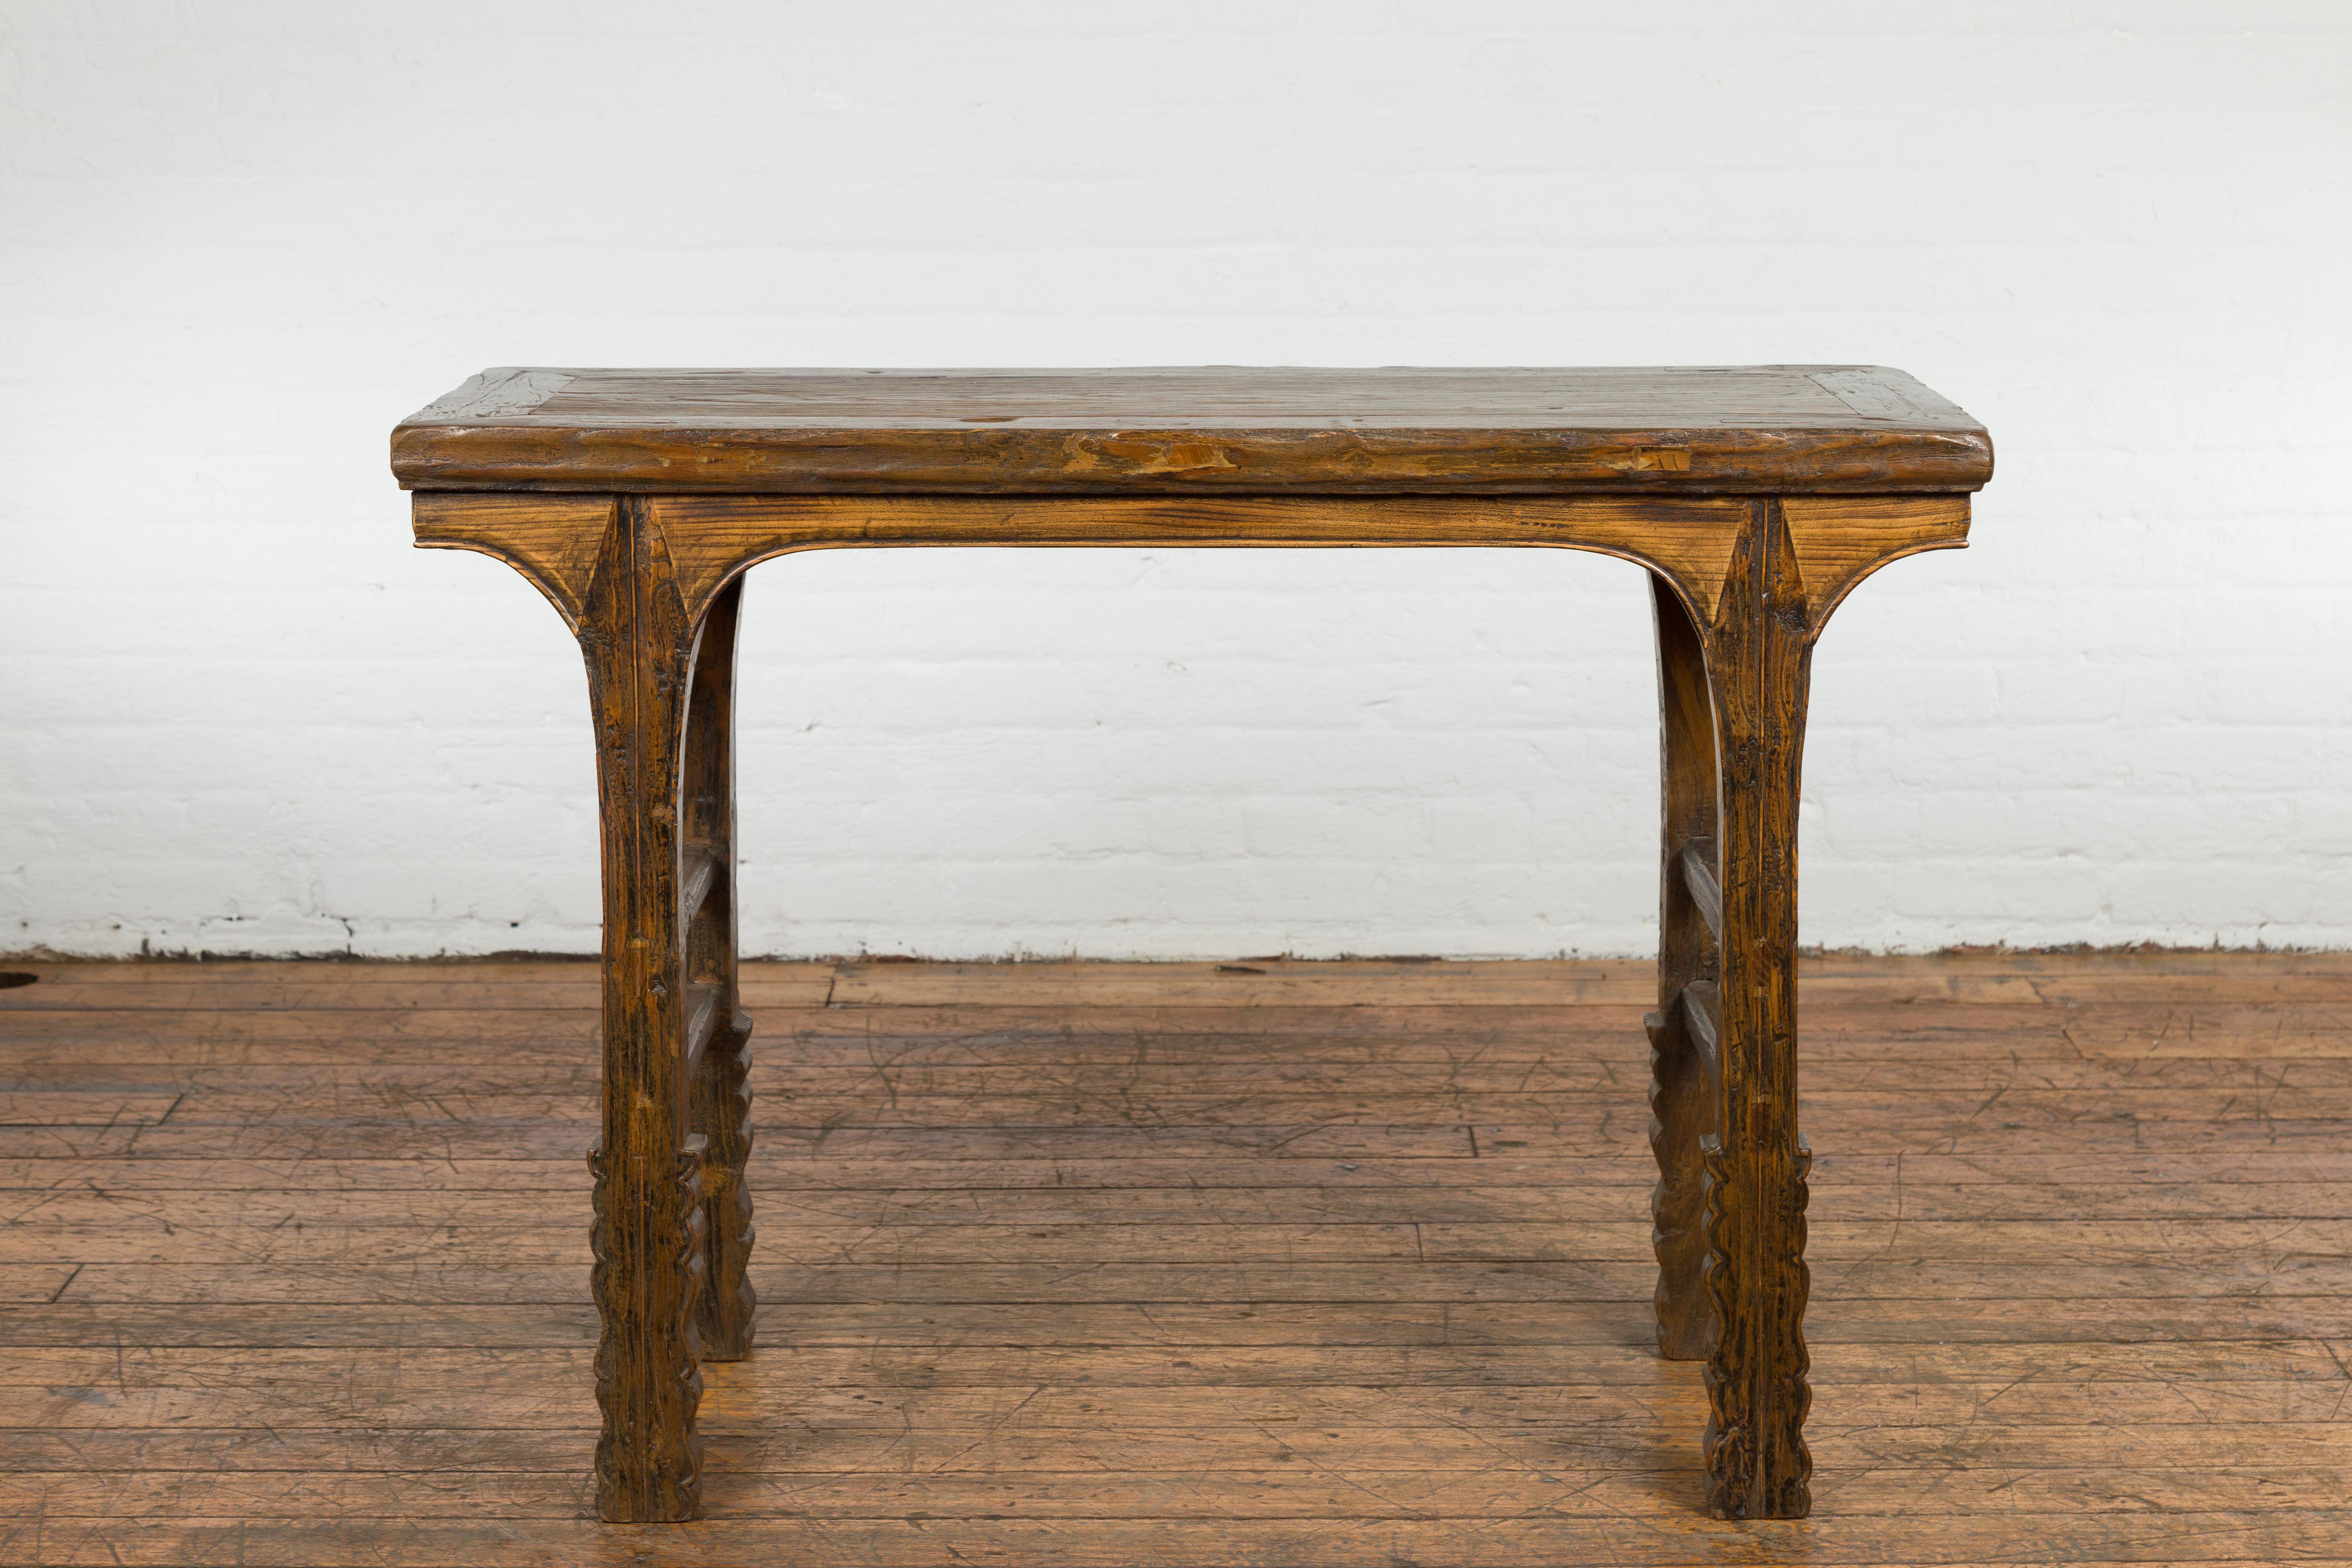 A Chinese Qing Dynasty period rustic console table from the 19th century with carved legs and double side stretchers. Welcome to the realm of rustic charm with this Chinese Qing Dynasty period console table. A relic from the 19th century, this table